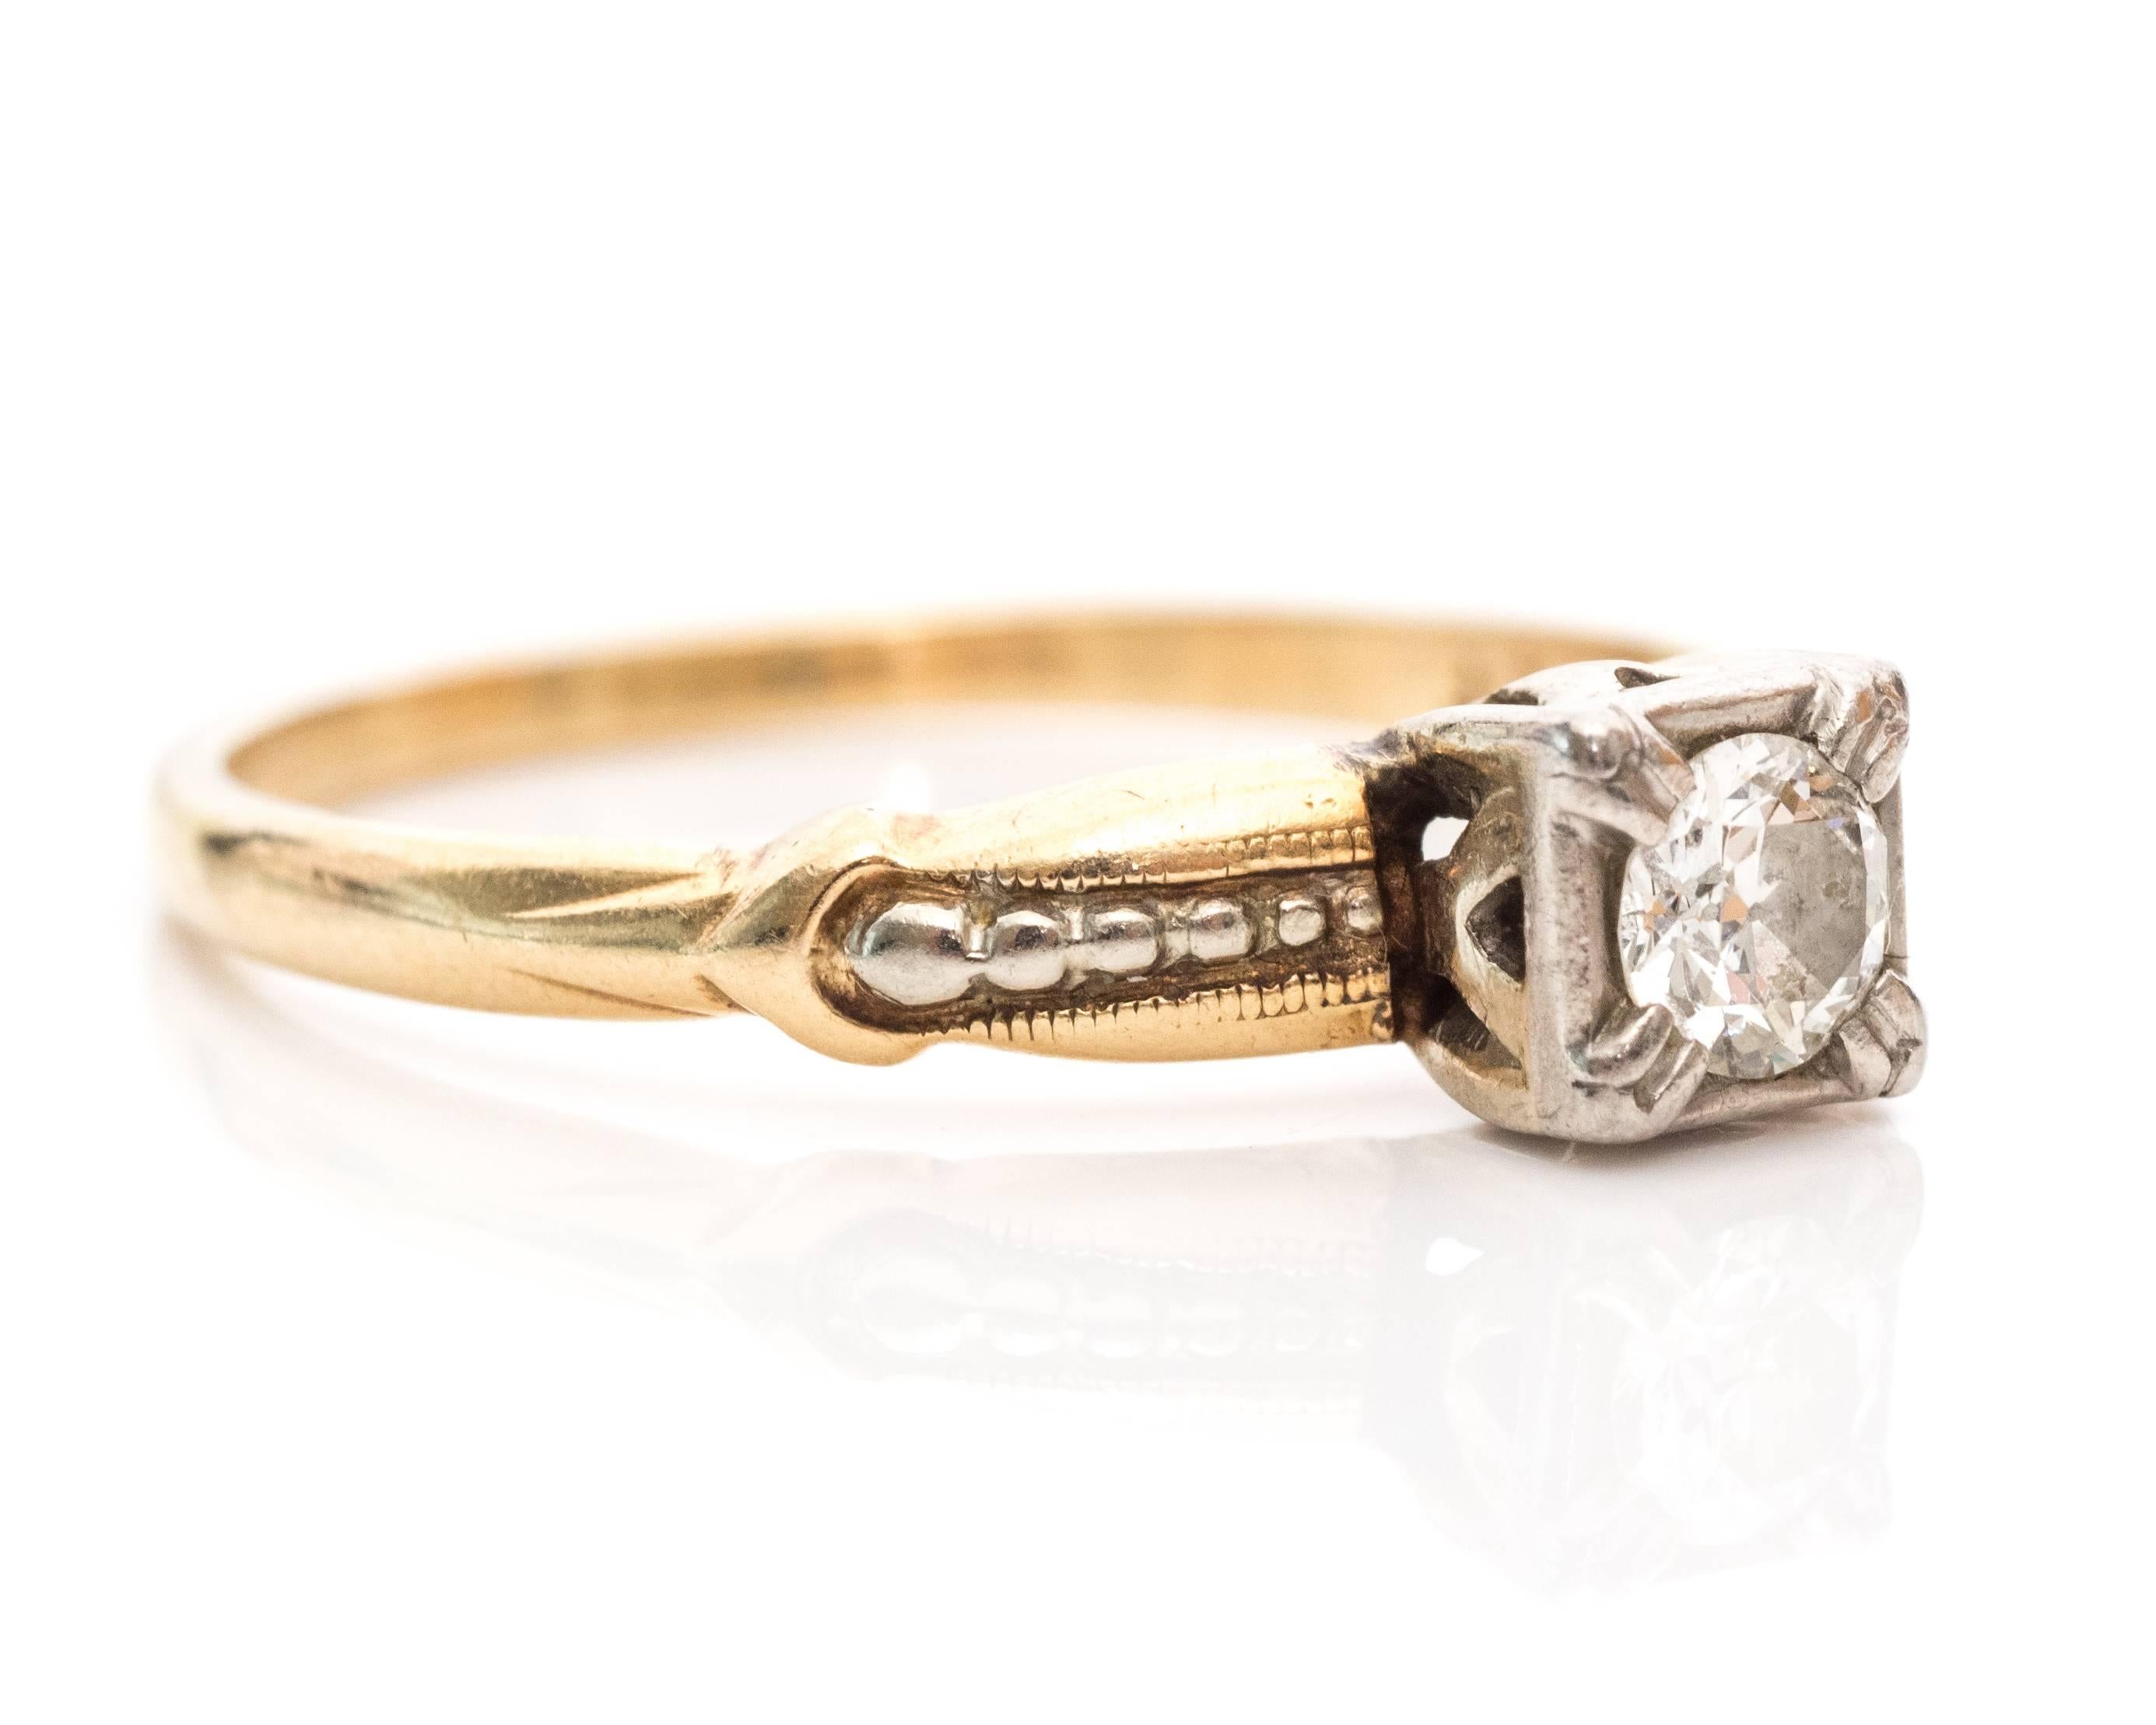 1930s Art Deco .20 Carat Old European Diamond Solitaire Engagement Ring
The solitaire has a high mounted diamond set in prongs similar to a fishtail set. The Old European diamond is .20carat. The mounting and middle shoulder accents are made of 14